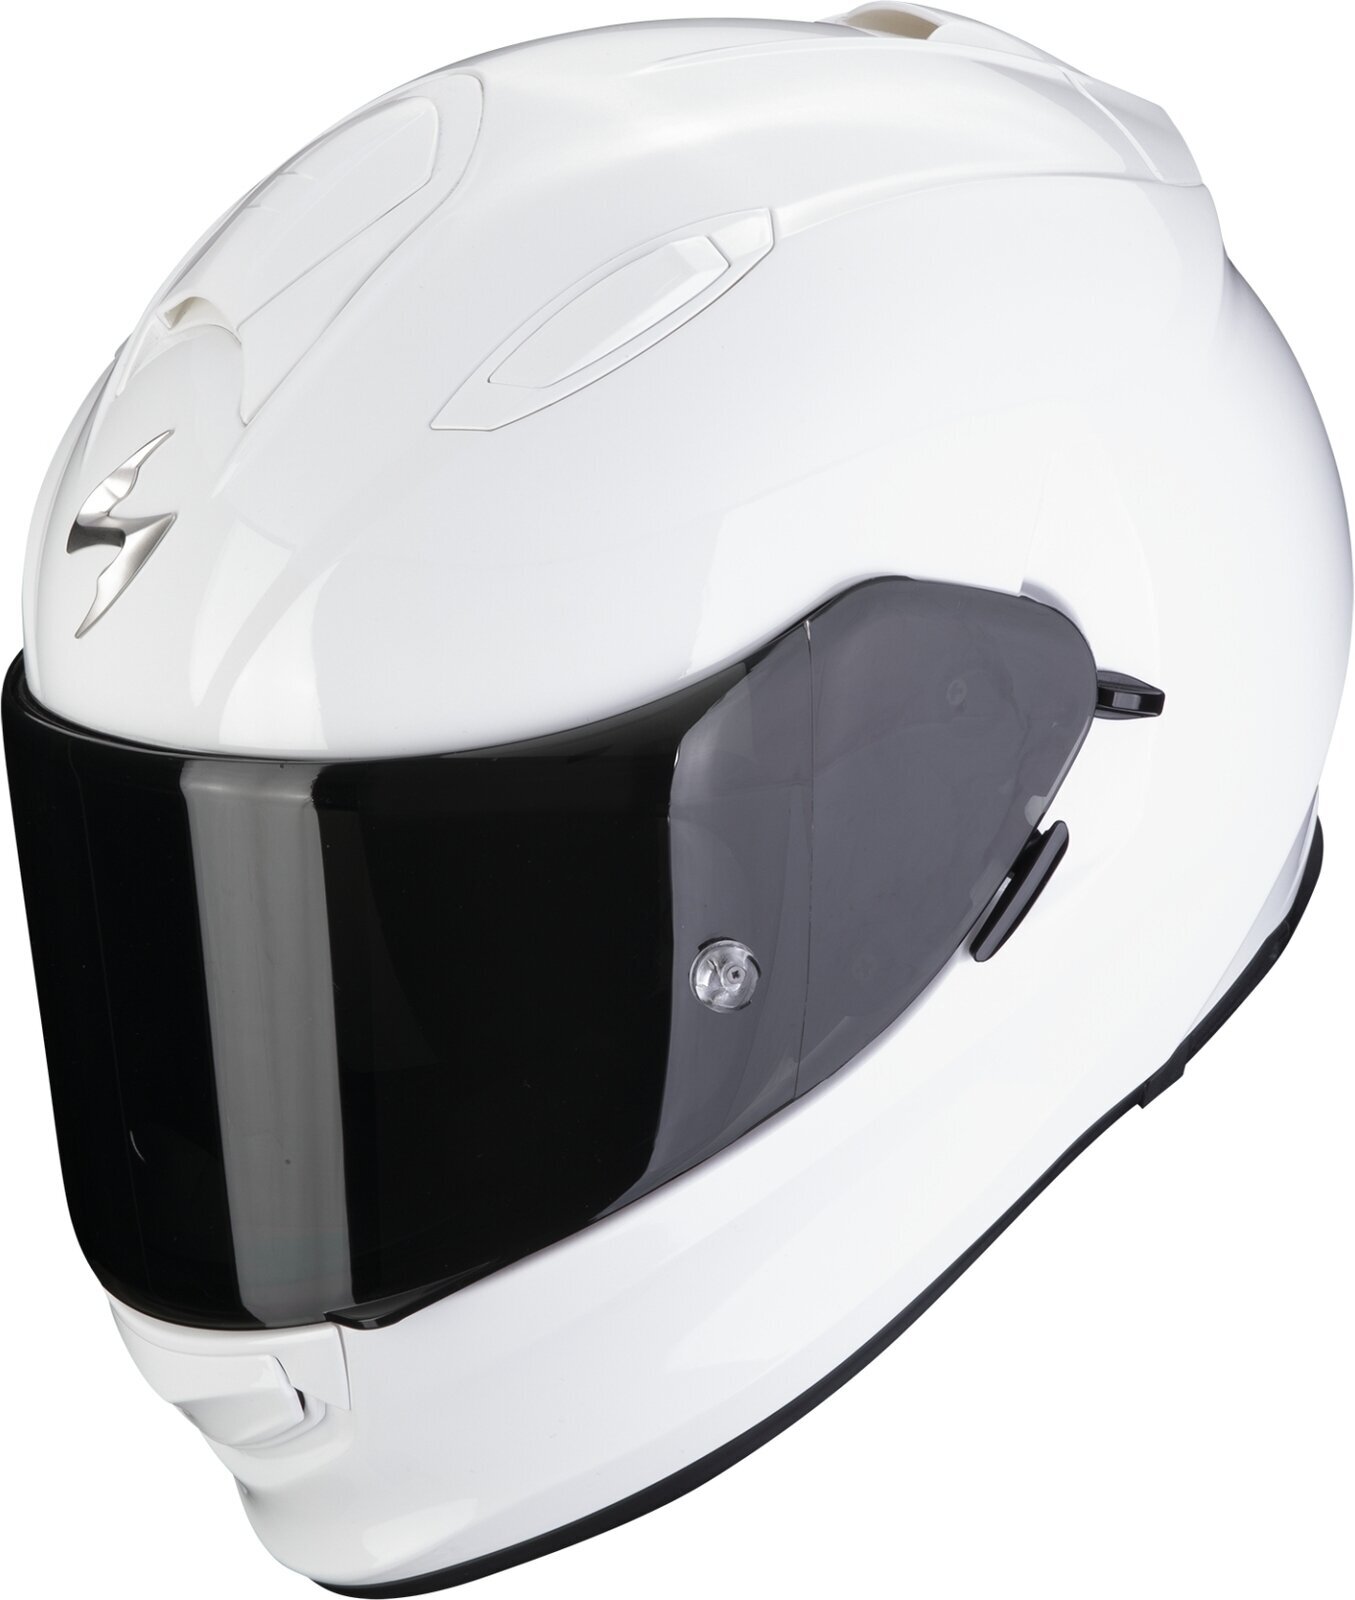 Kask Scorpion EXO 491 SOLID White L Kask